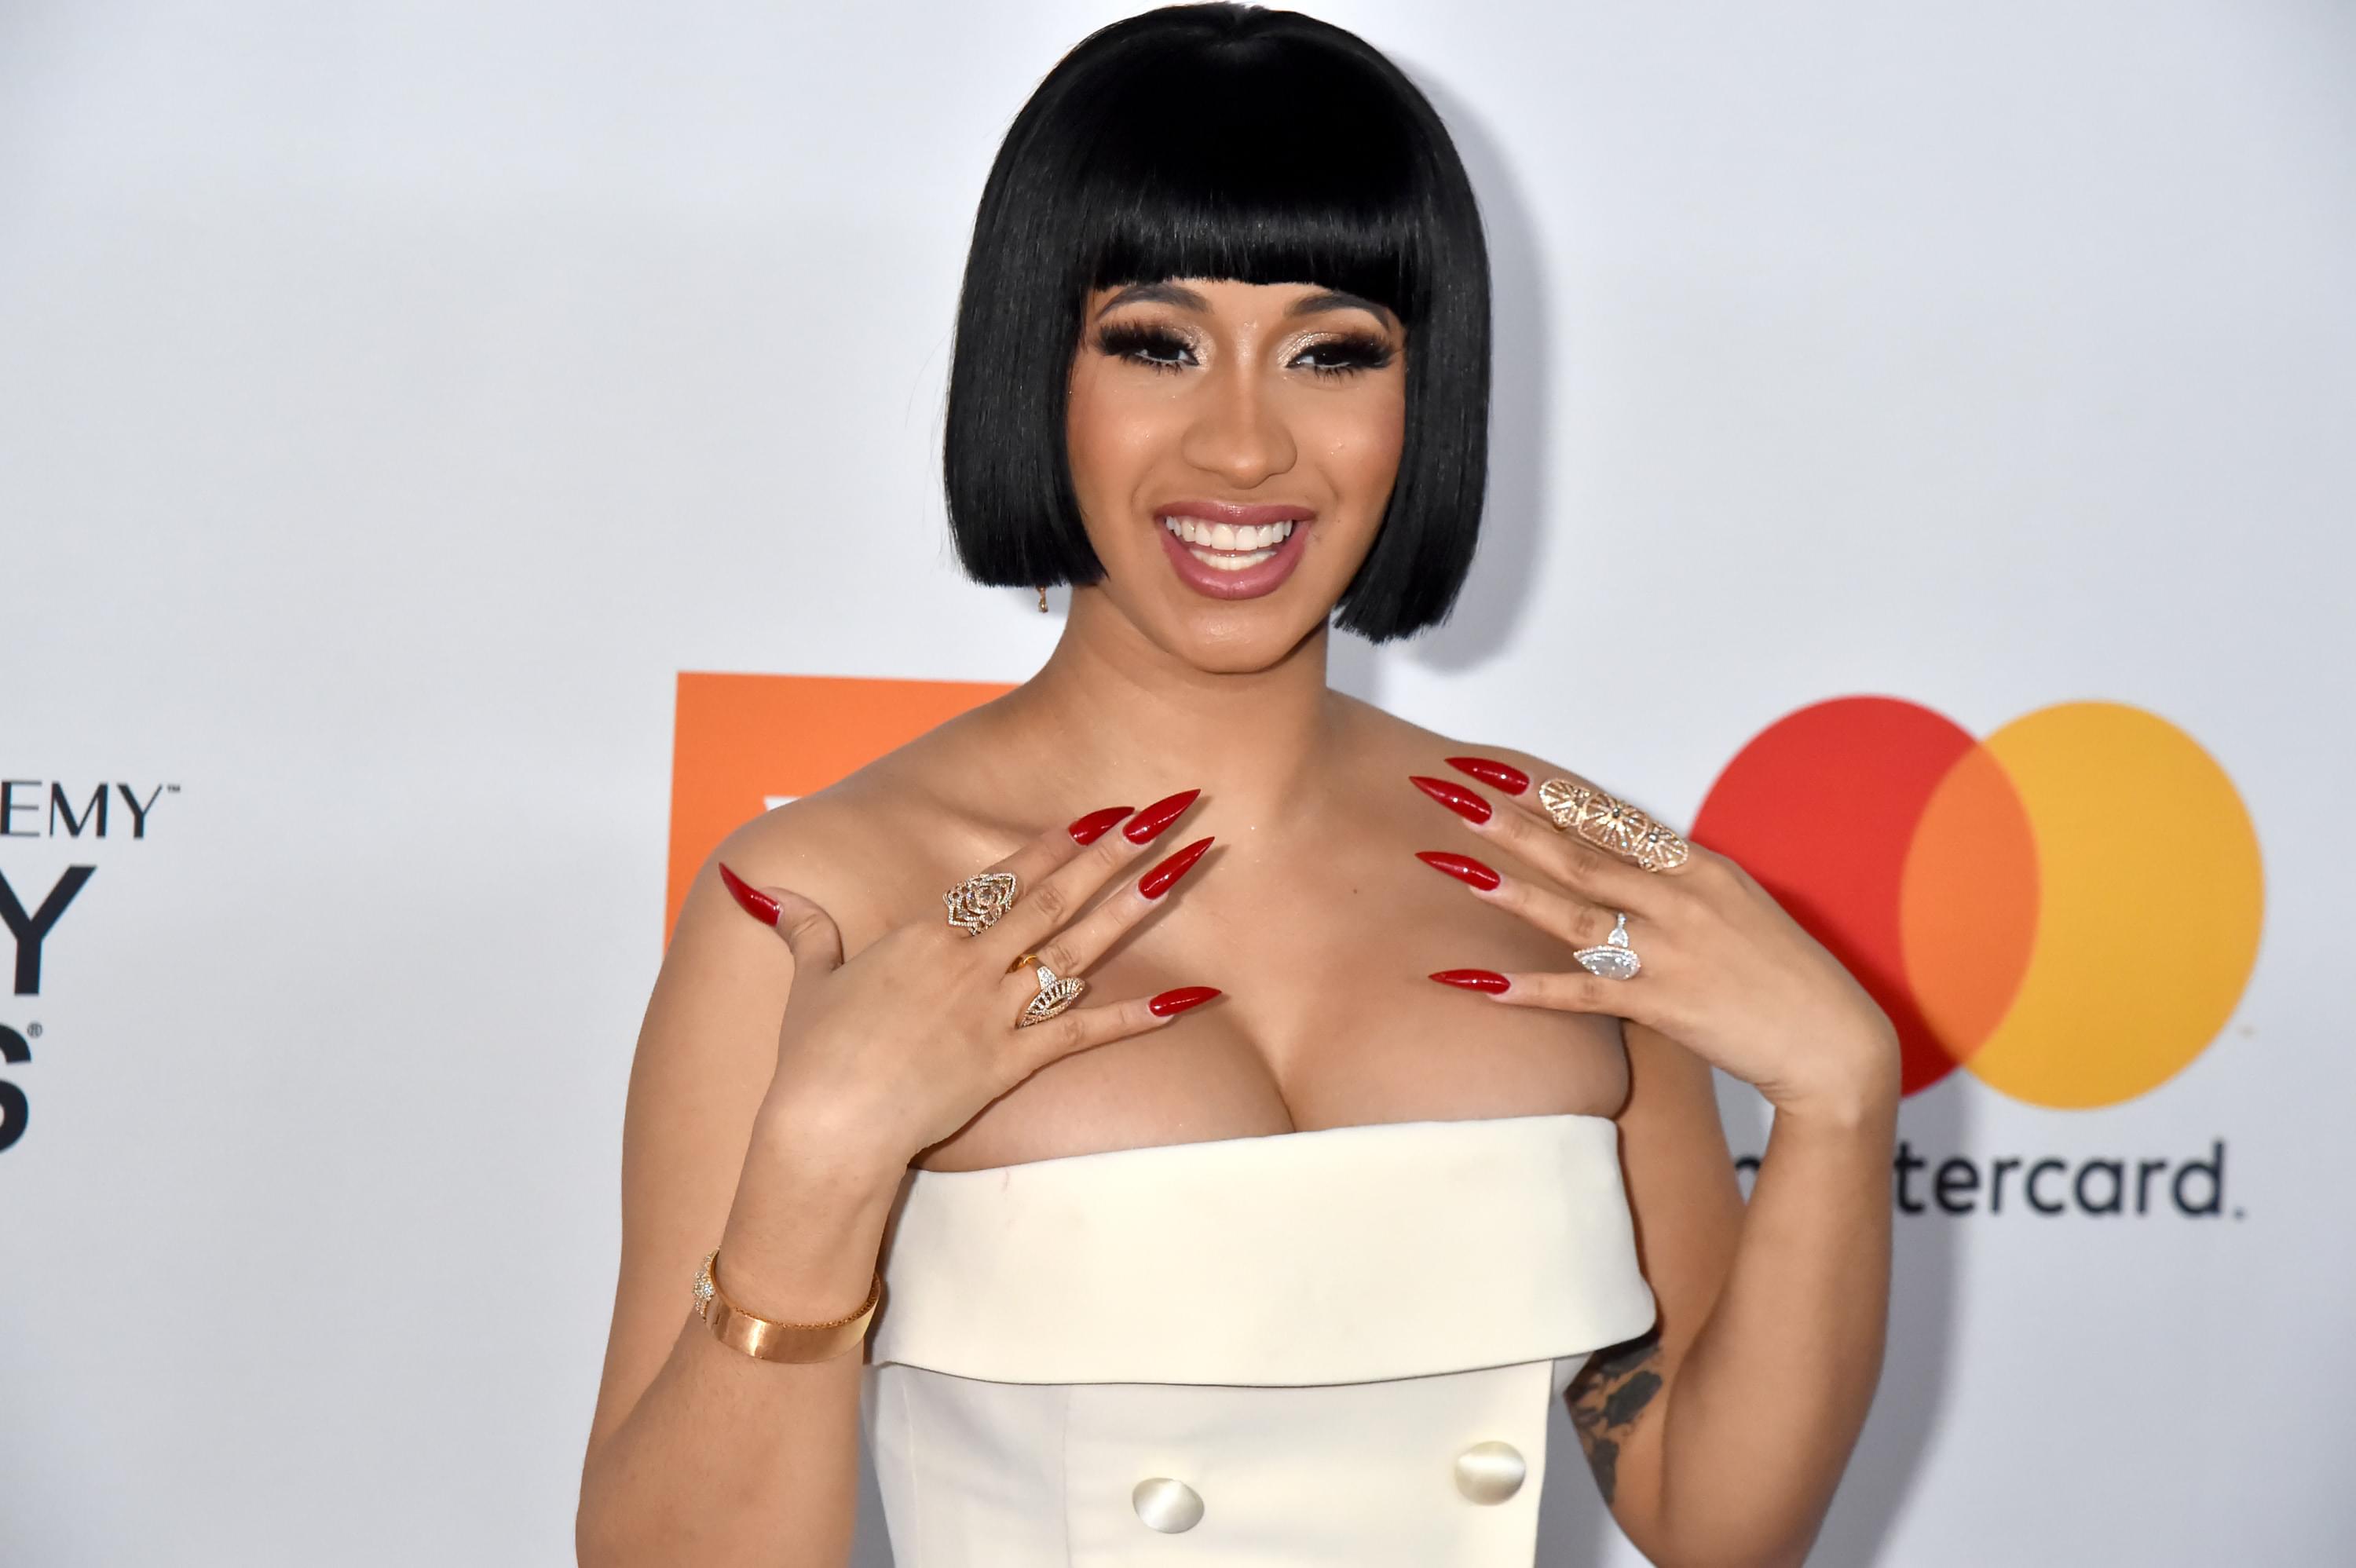 Cardi B Plays The Voice Of Alexa In upcoming Super Bowl Commercial